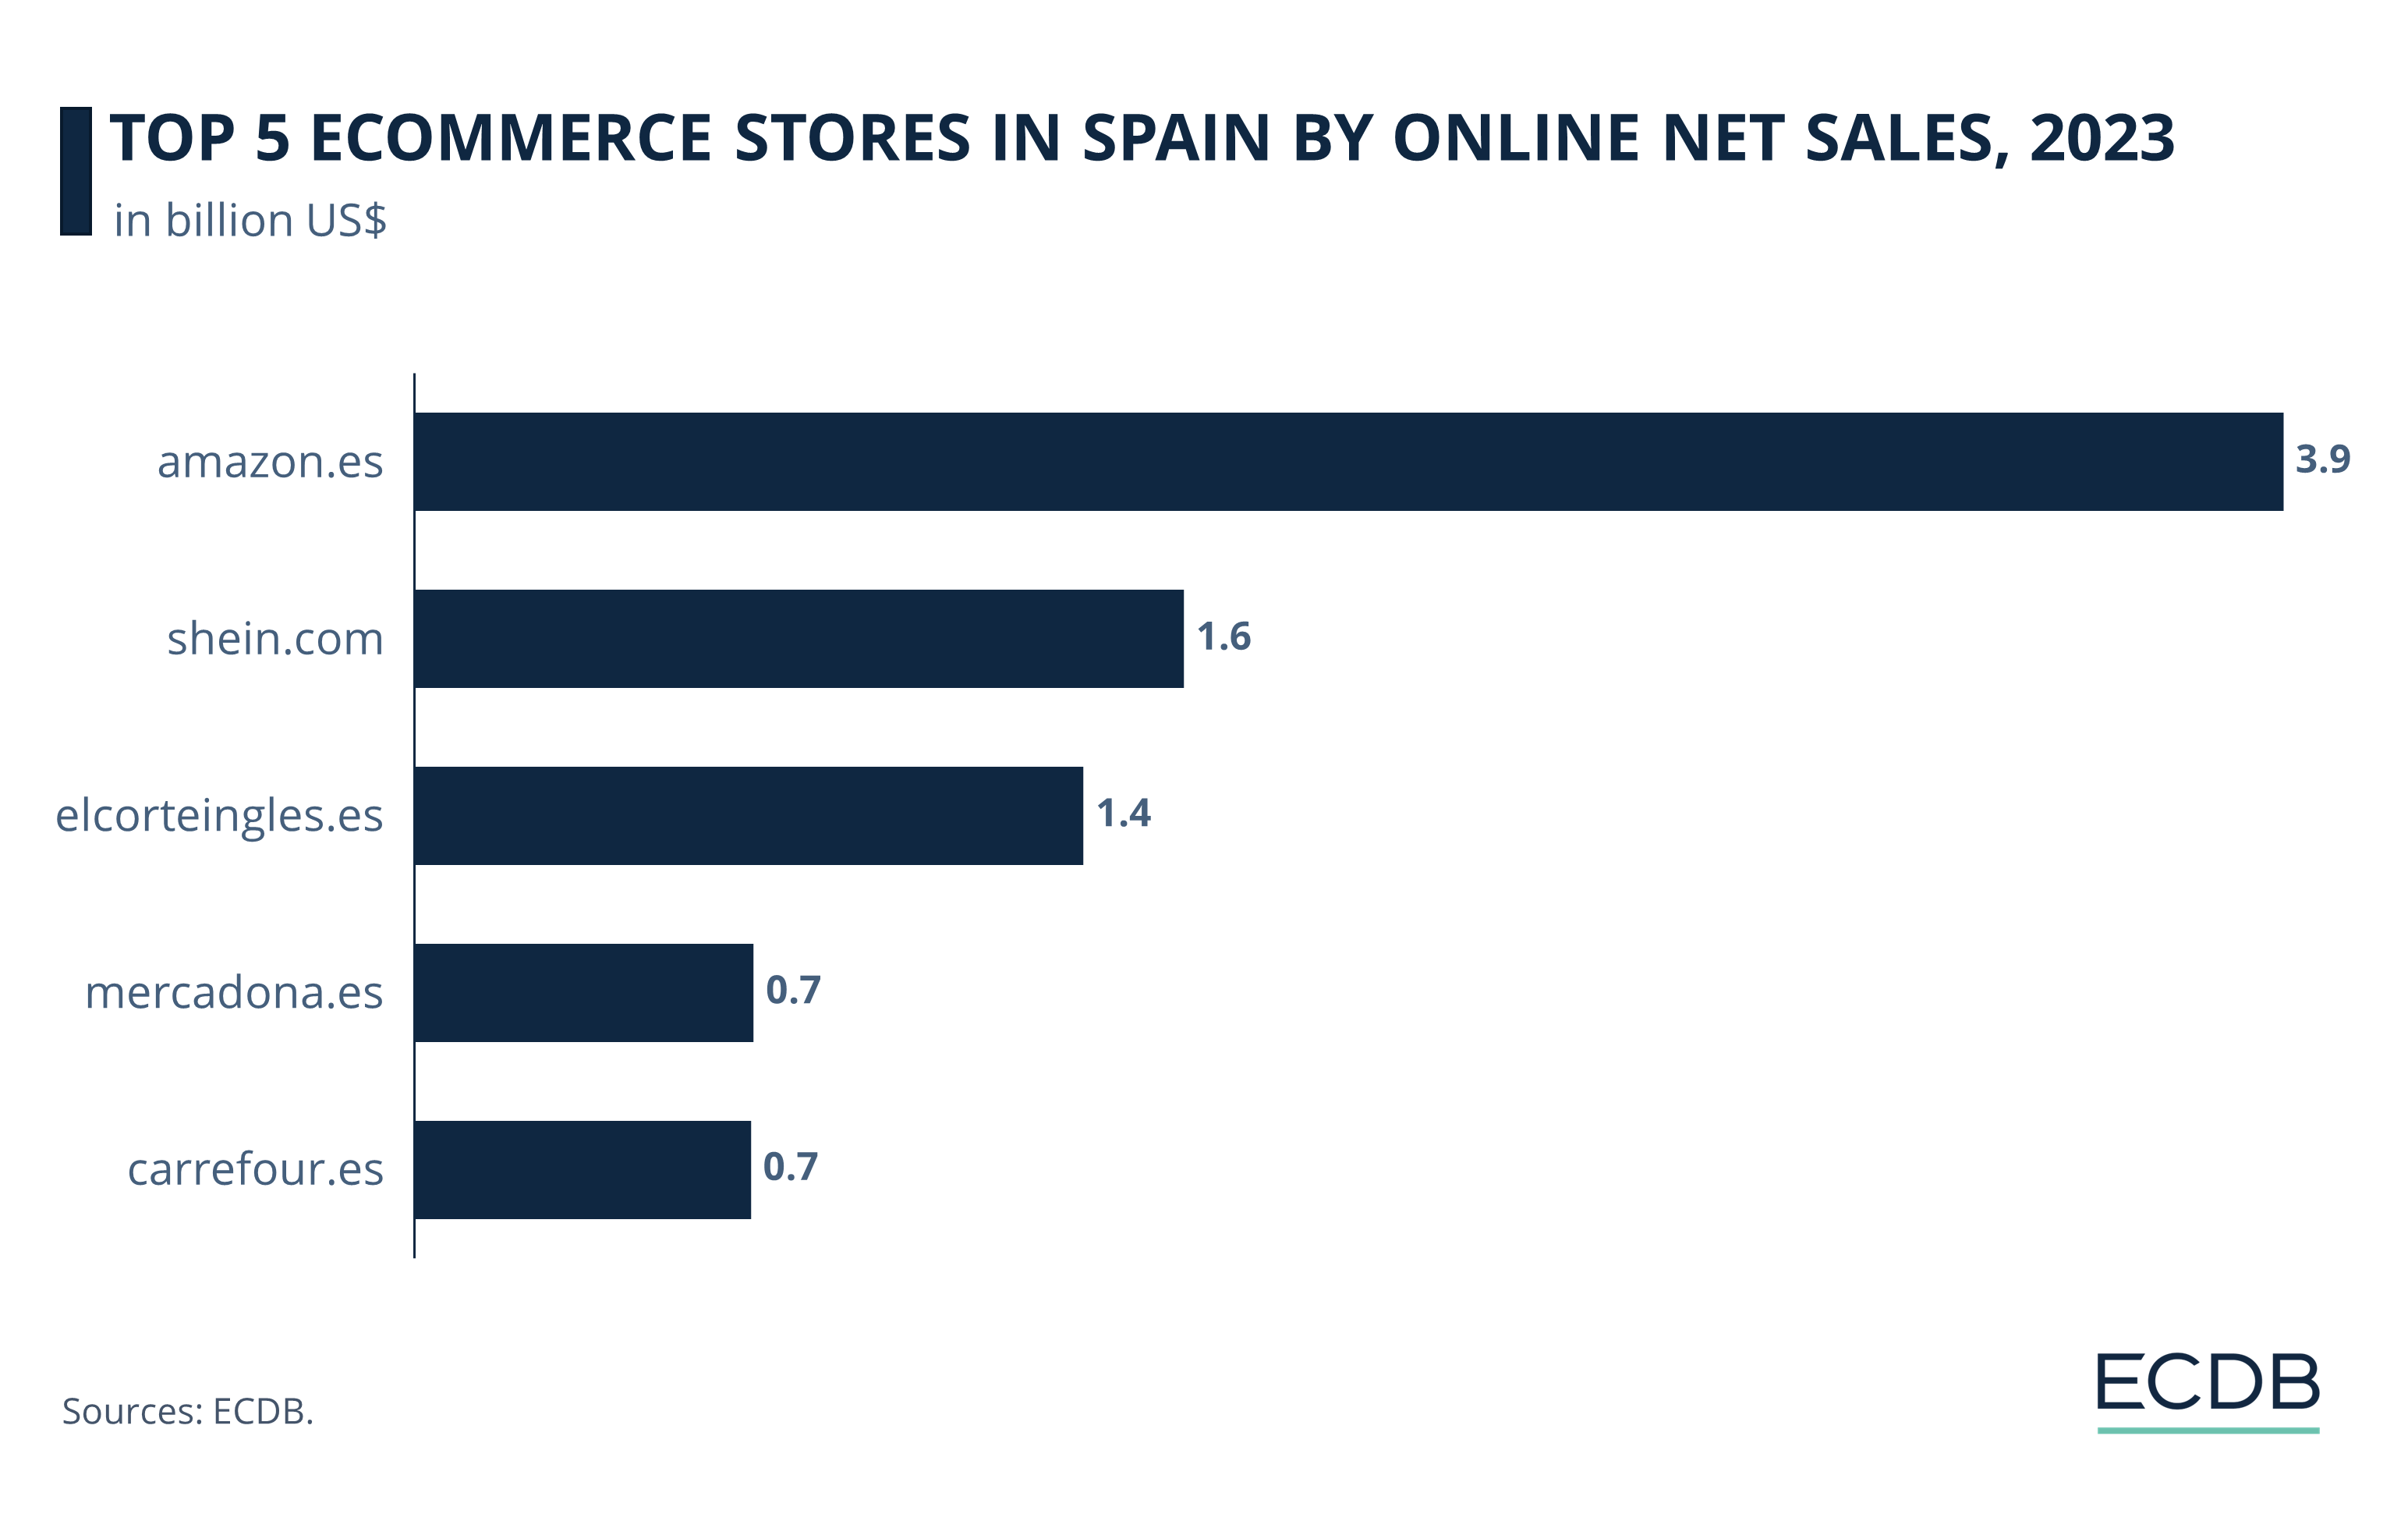 Top 5 eCommerce Stores in Spain by Online Net Sales, 2023